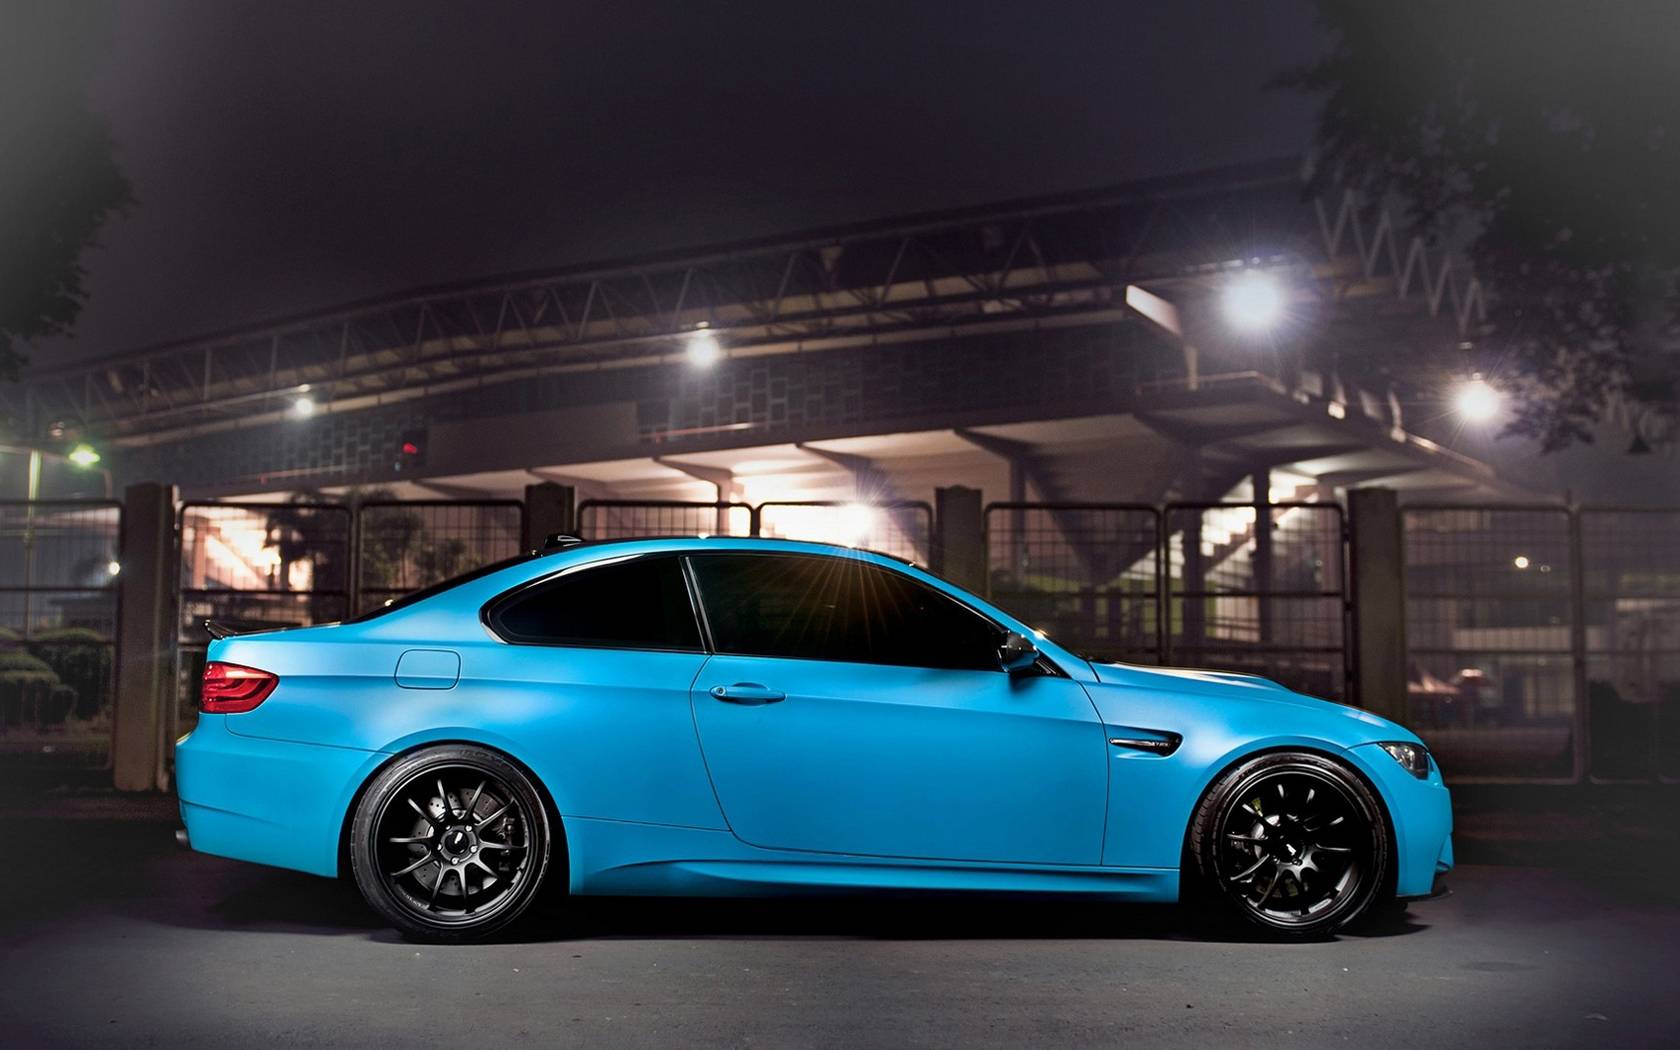 Wallpapers night bmw blue on the desktop